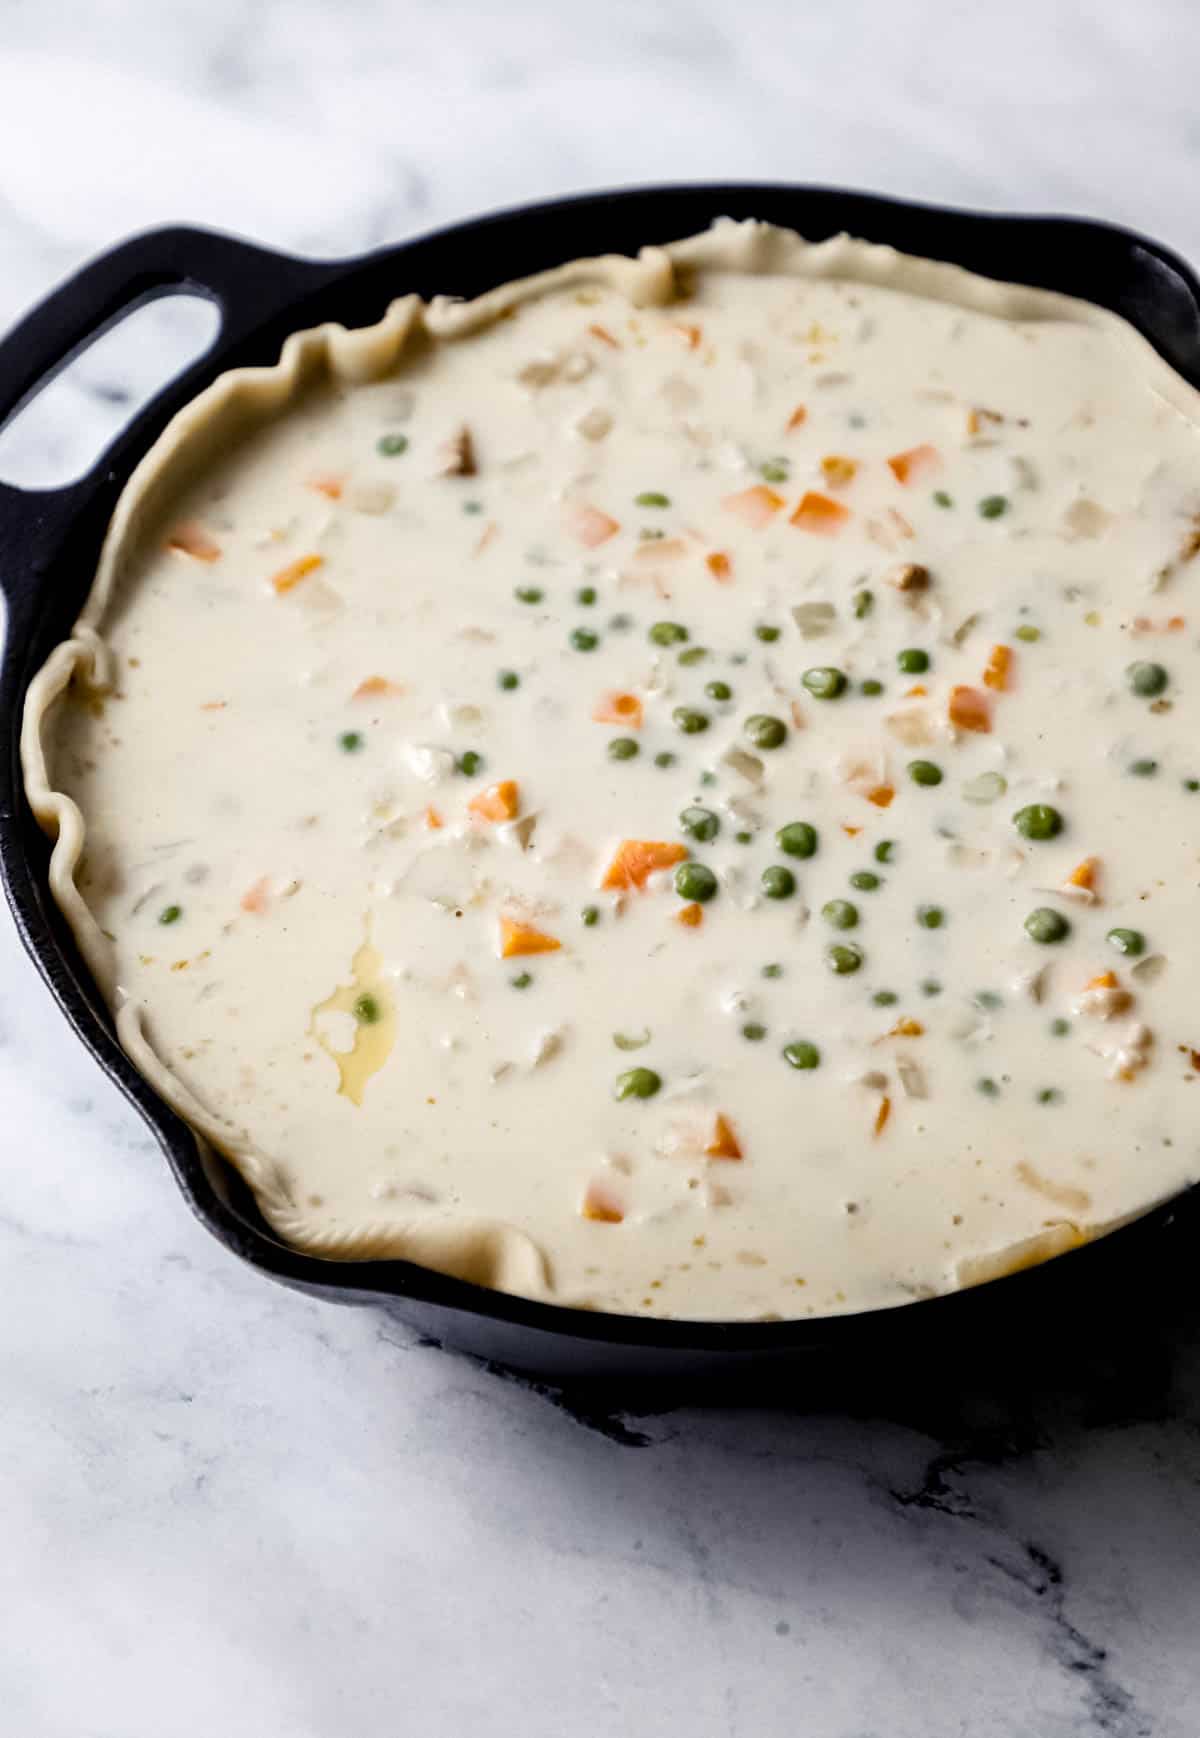 sauce ingredients added to chicken and pie crust in cast iron skillet